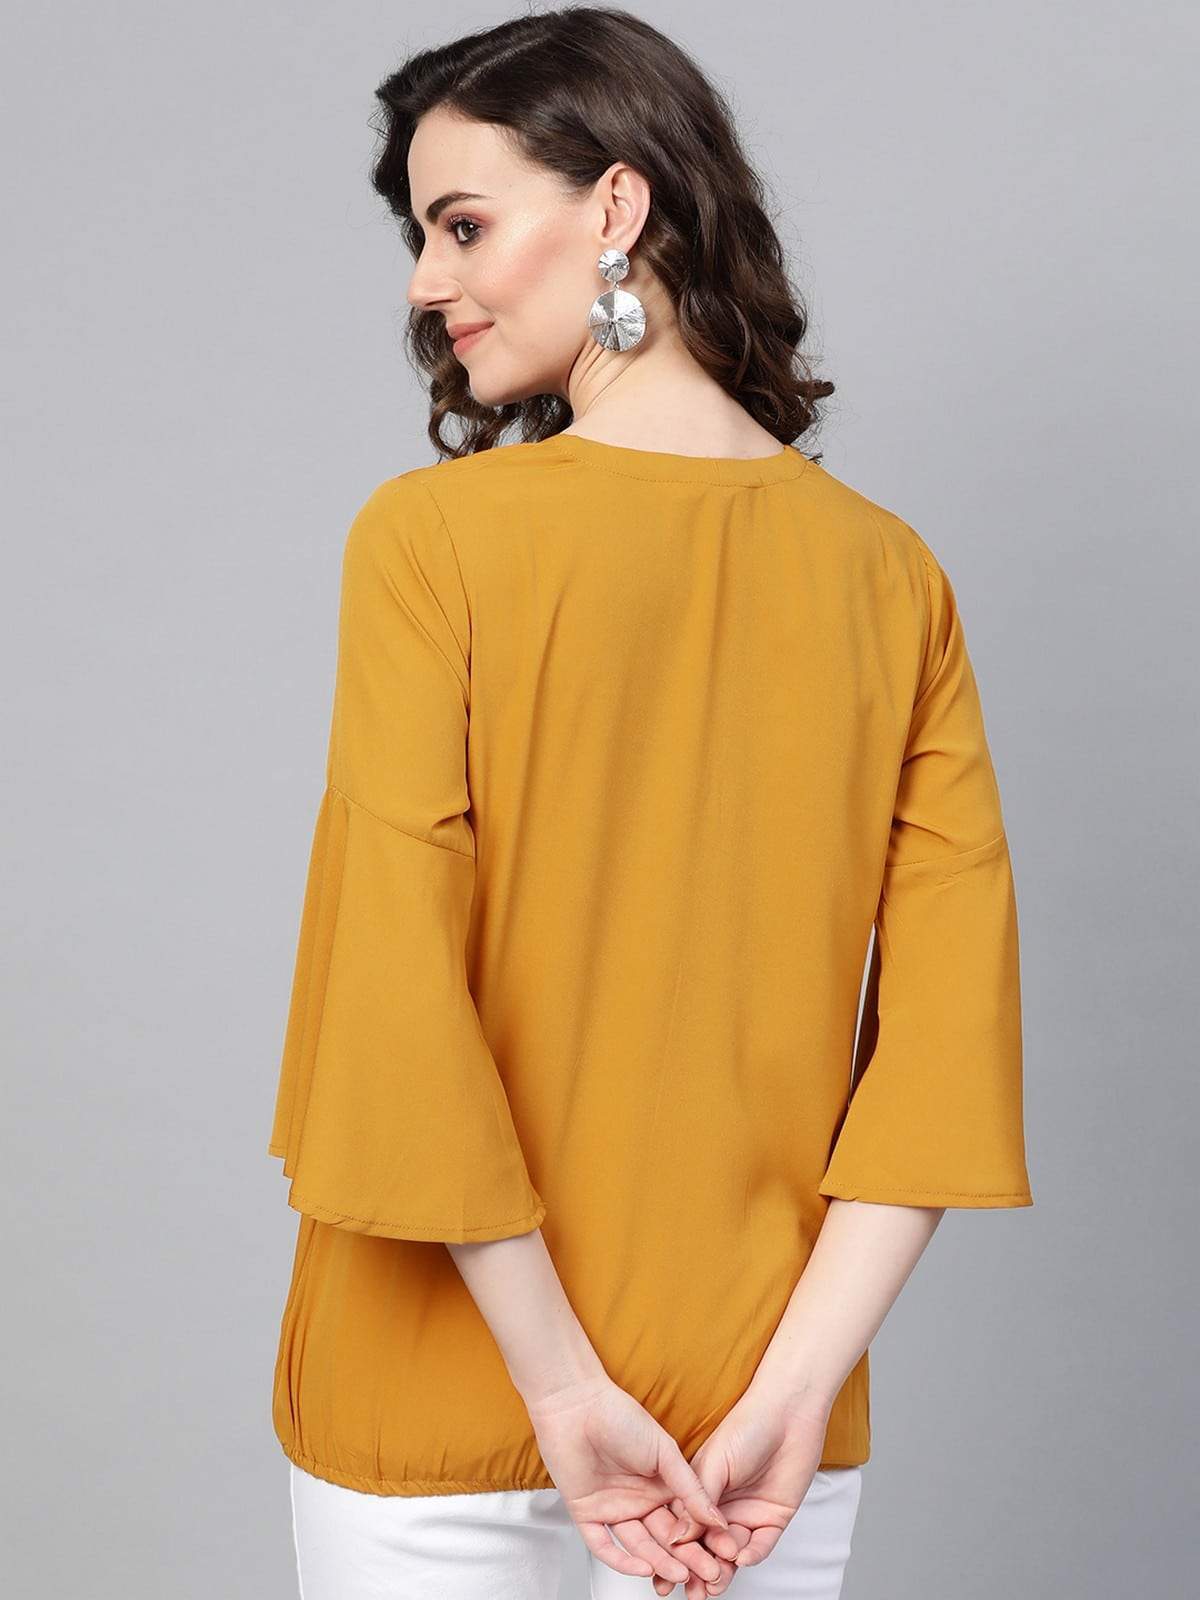 Women's Solid Shirt Balloon Top With Huge Bell Sleeves - Pannkh